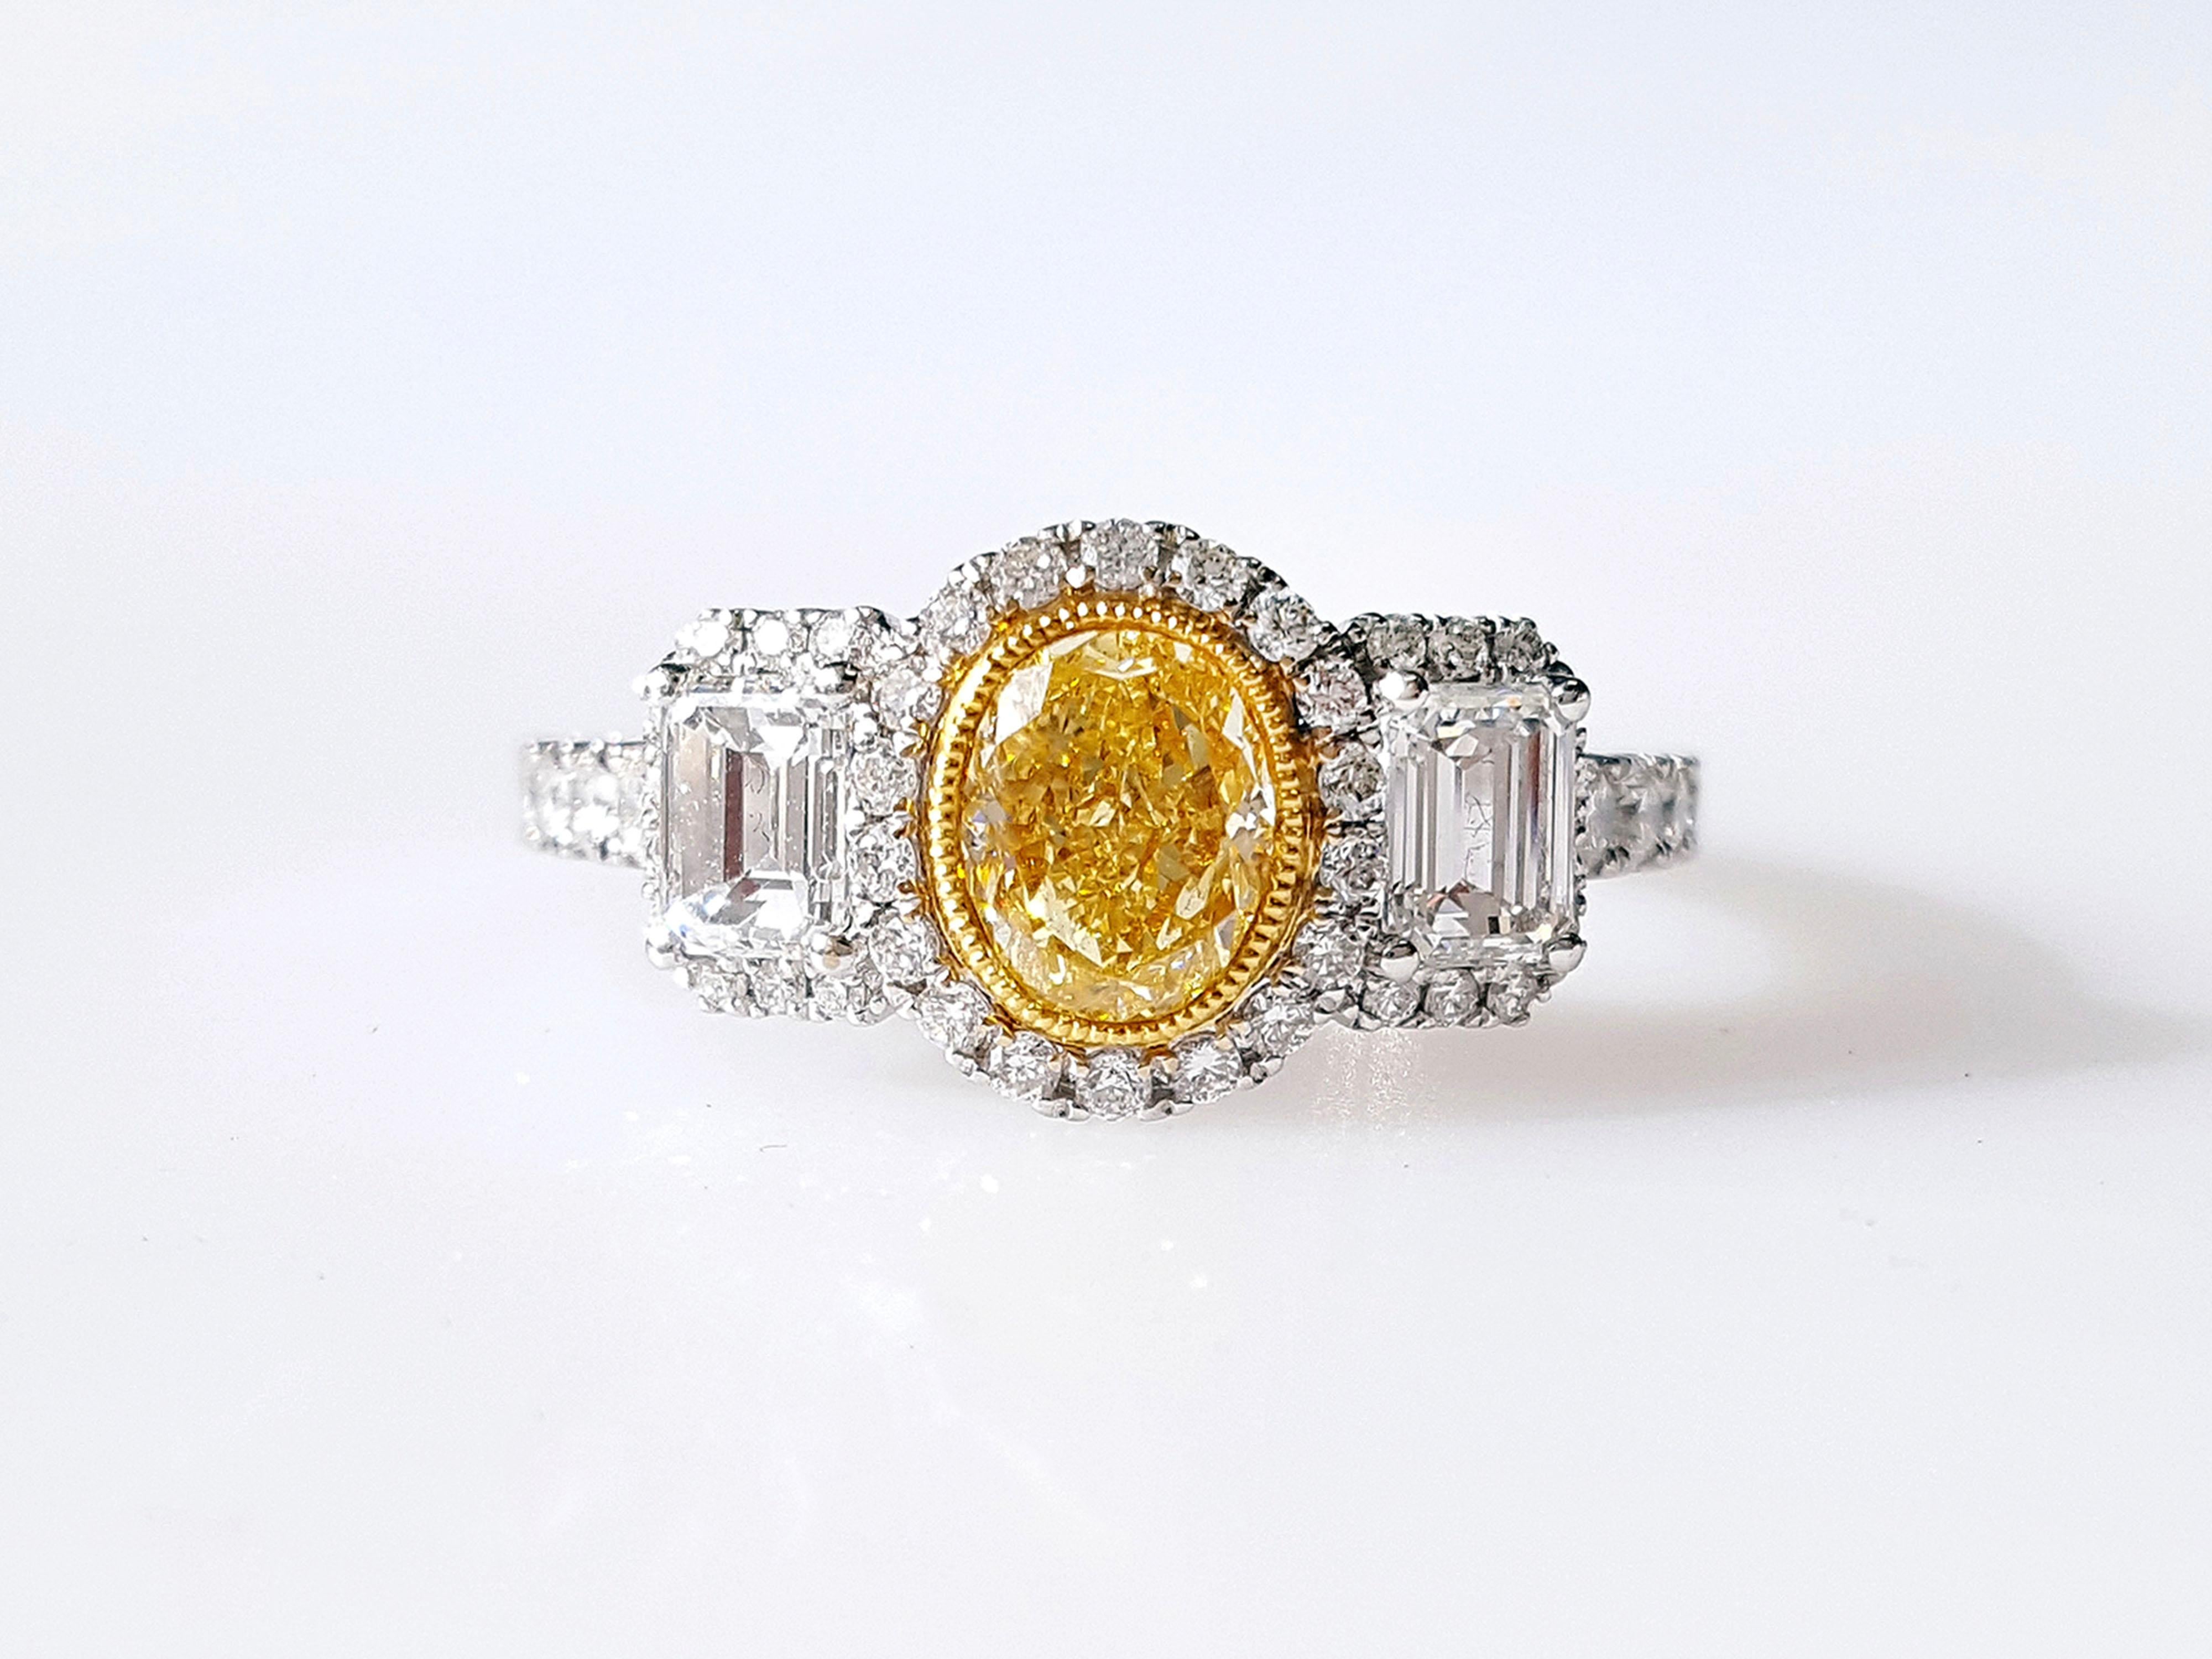 A stunning Three-Stones Engagement ring, 0.82 carat Yellow Oval-cut diamond. Flanked by two Emerald-cut diamonds total weight 0.58 carat. The classic design brings out the beauty of the center stone with the surrounding 46 round white diamonds 0.38